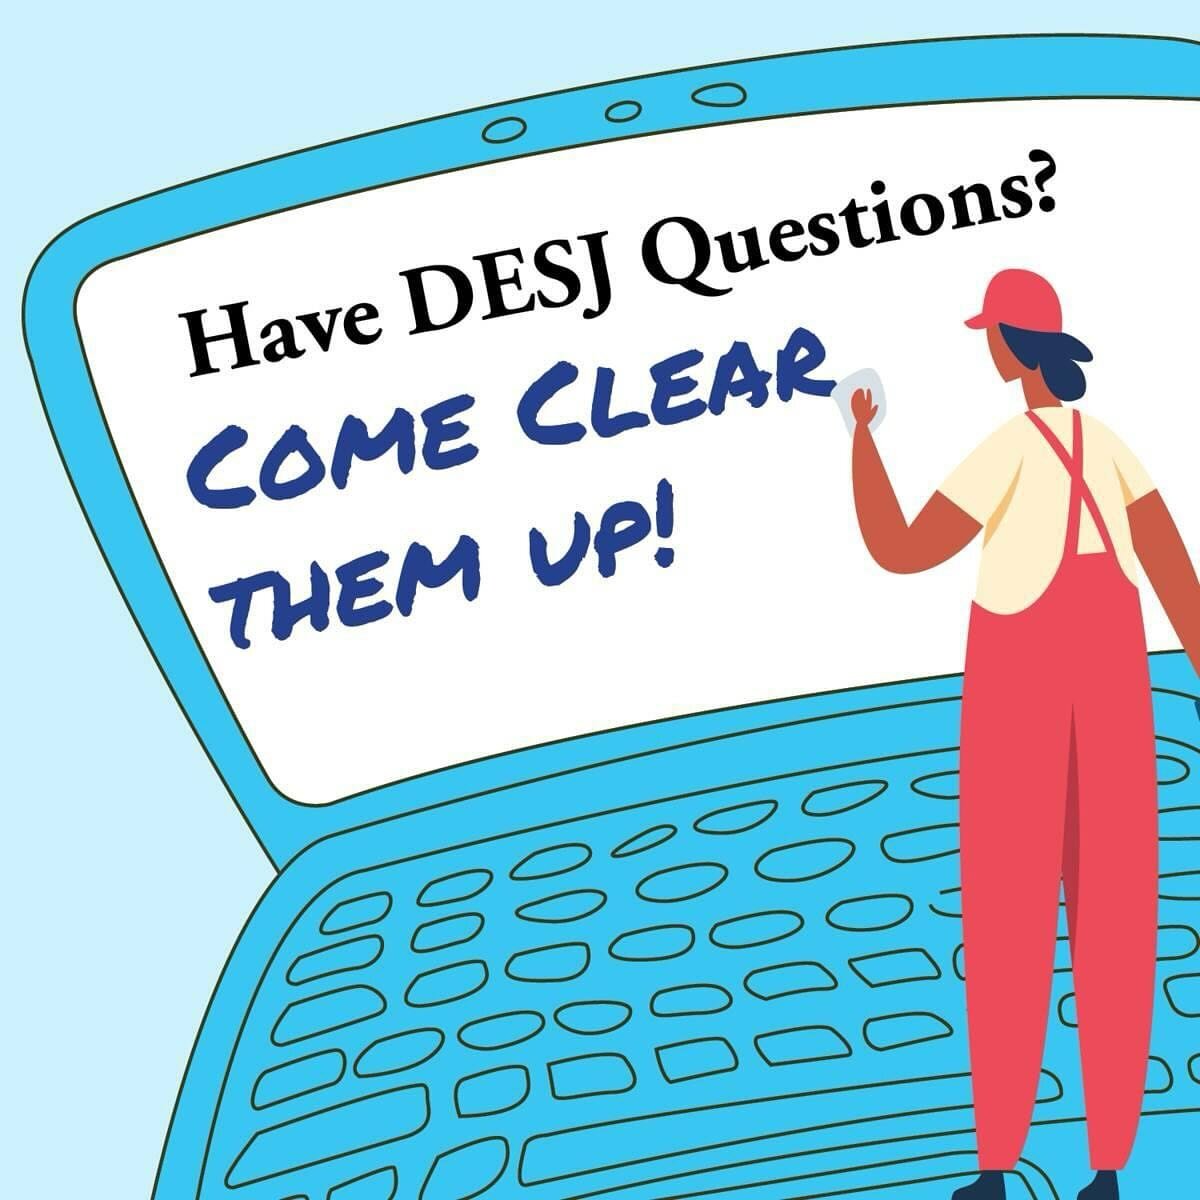 Maximize your impact with Digital Empowerment for Social Justice!
Have questions?
Join us for the DESJ Open House on Tuesday, February 6, at 10 am. Learn more about the program, meet the minds behind it, and discover how DESJ can elevate your campaig